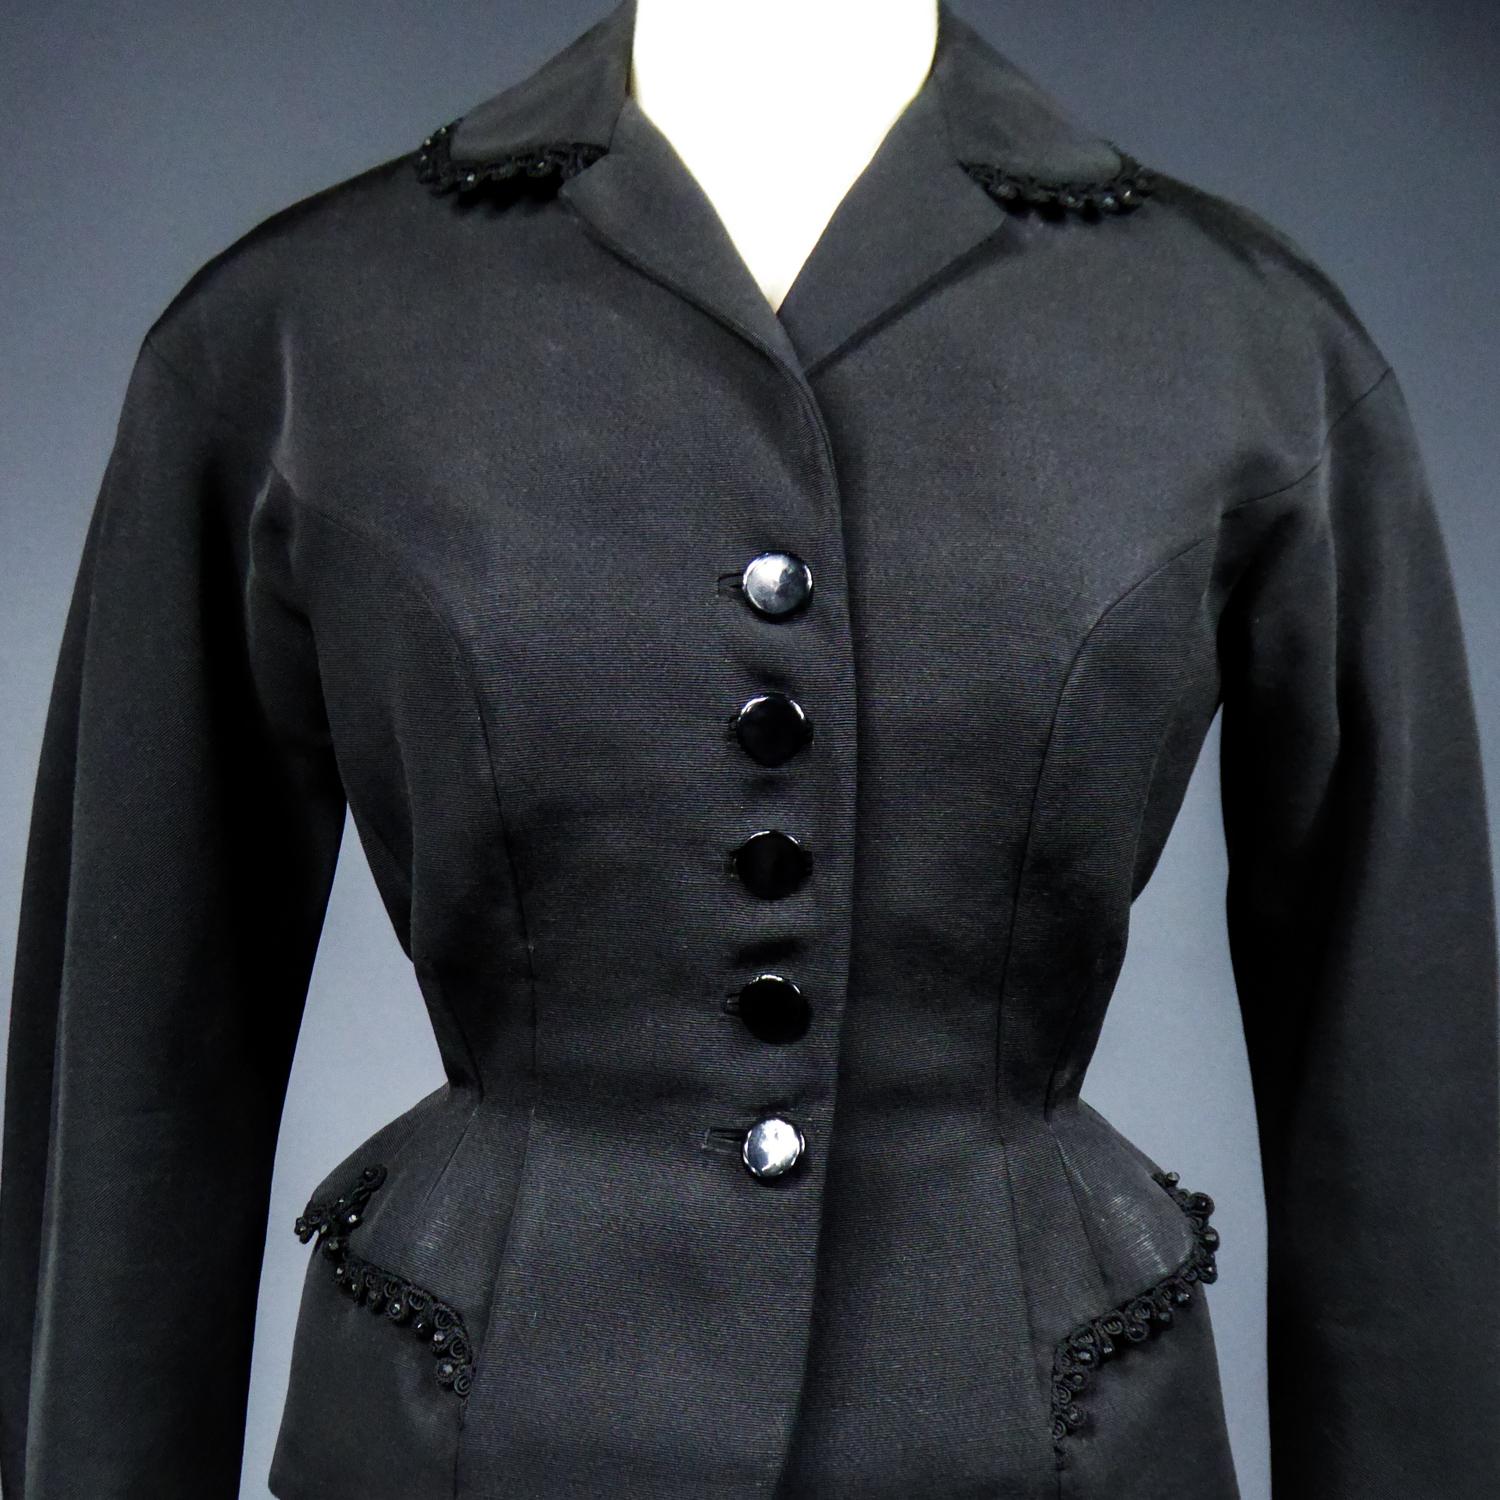 Circa 1948/1950
France

Bar jacket in black fluted silk ottoman labeled Frank & Fils in the tradition of the New Look of Christian Dior and dating back to the late 1950s. Fitted jacket with structured cut and marked waist marrying the hips. Cross